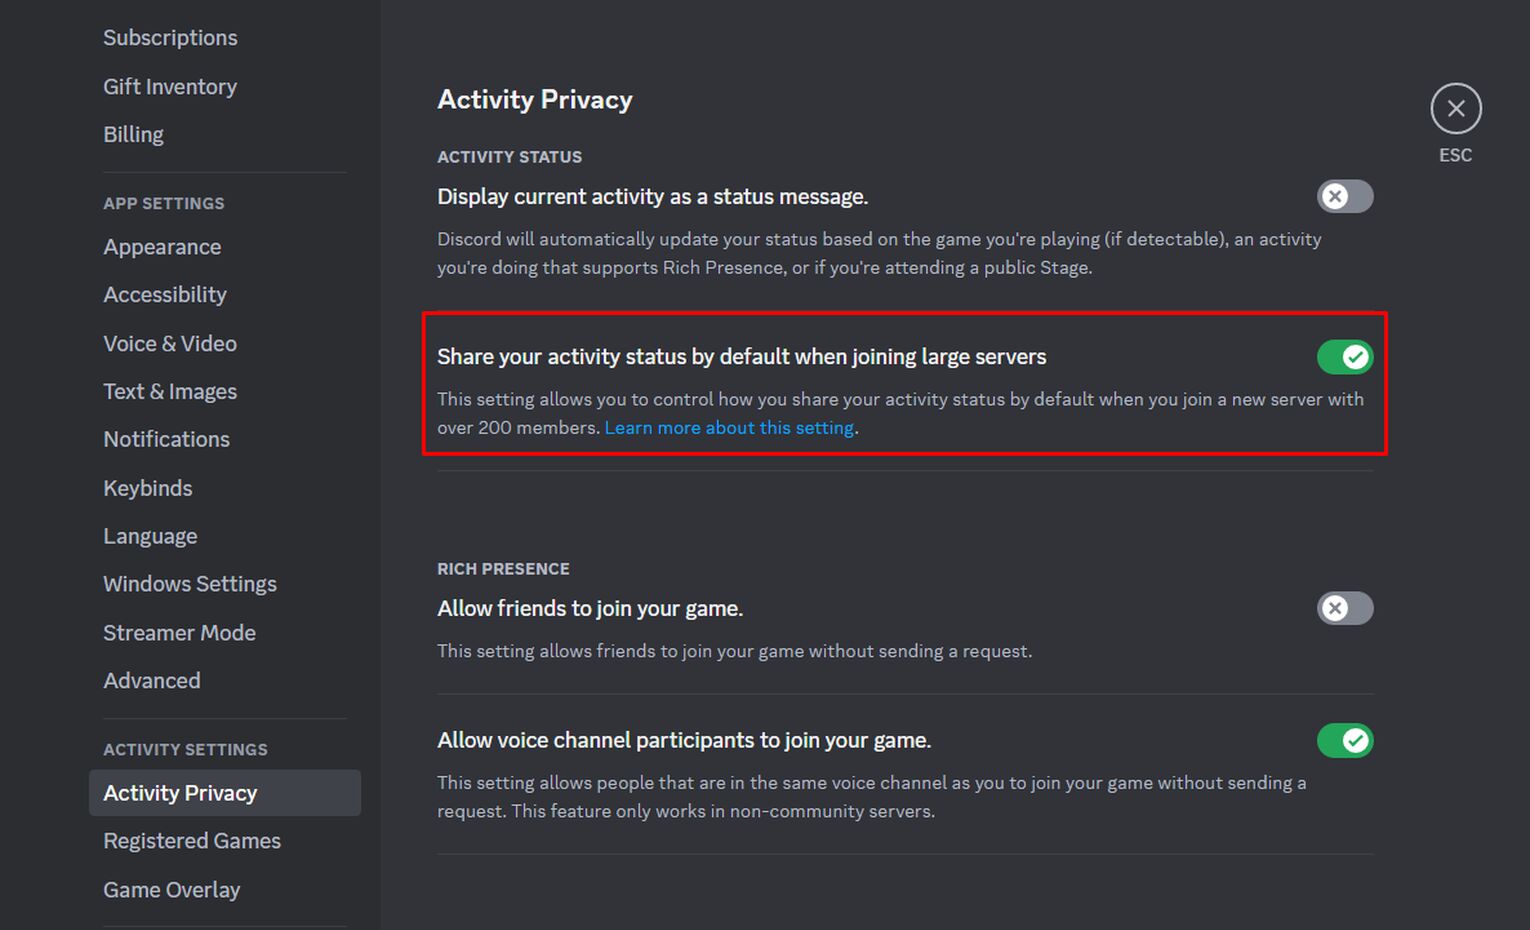 Share your activity status by default when joining large servers